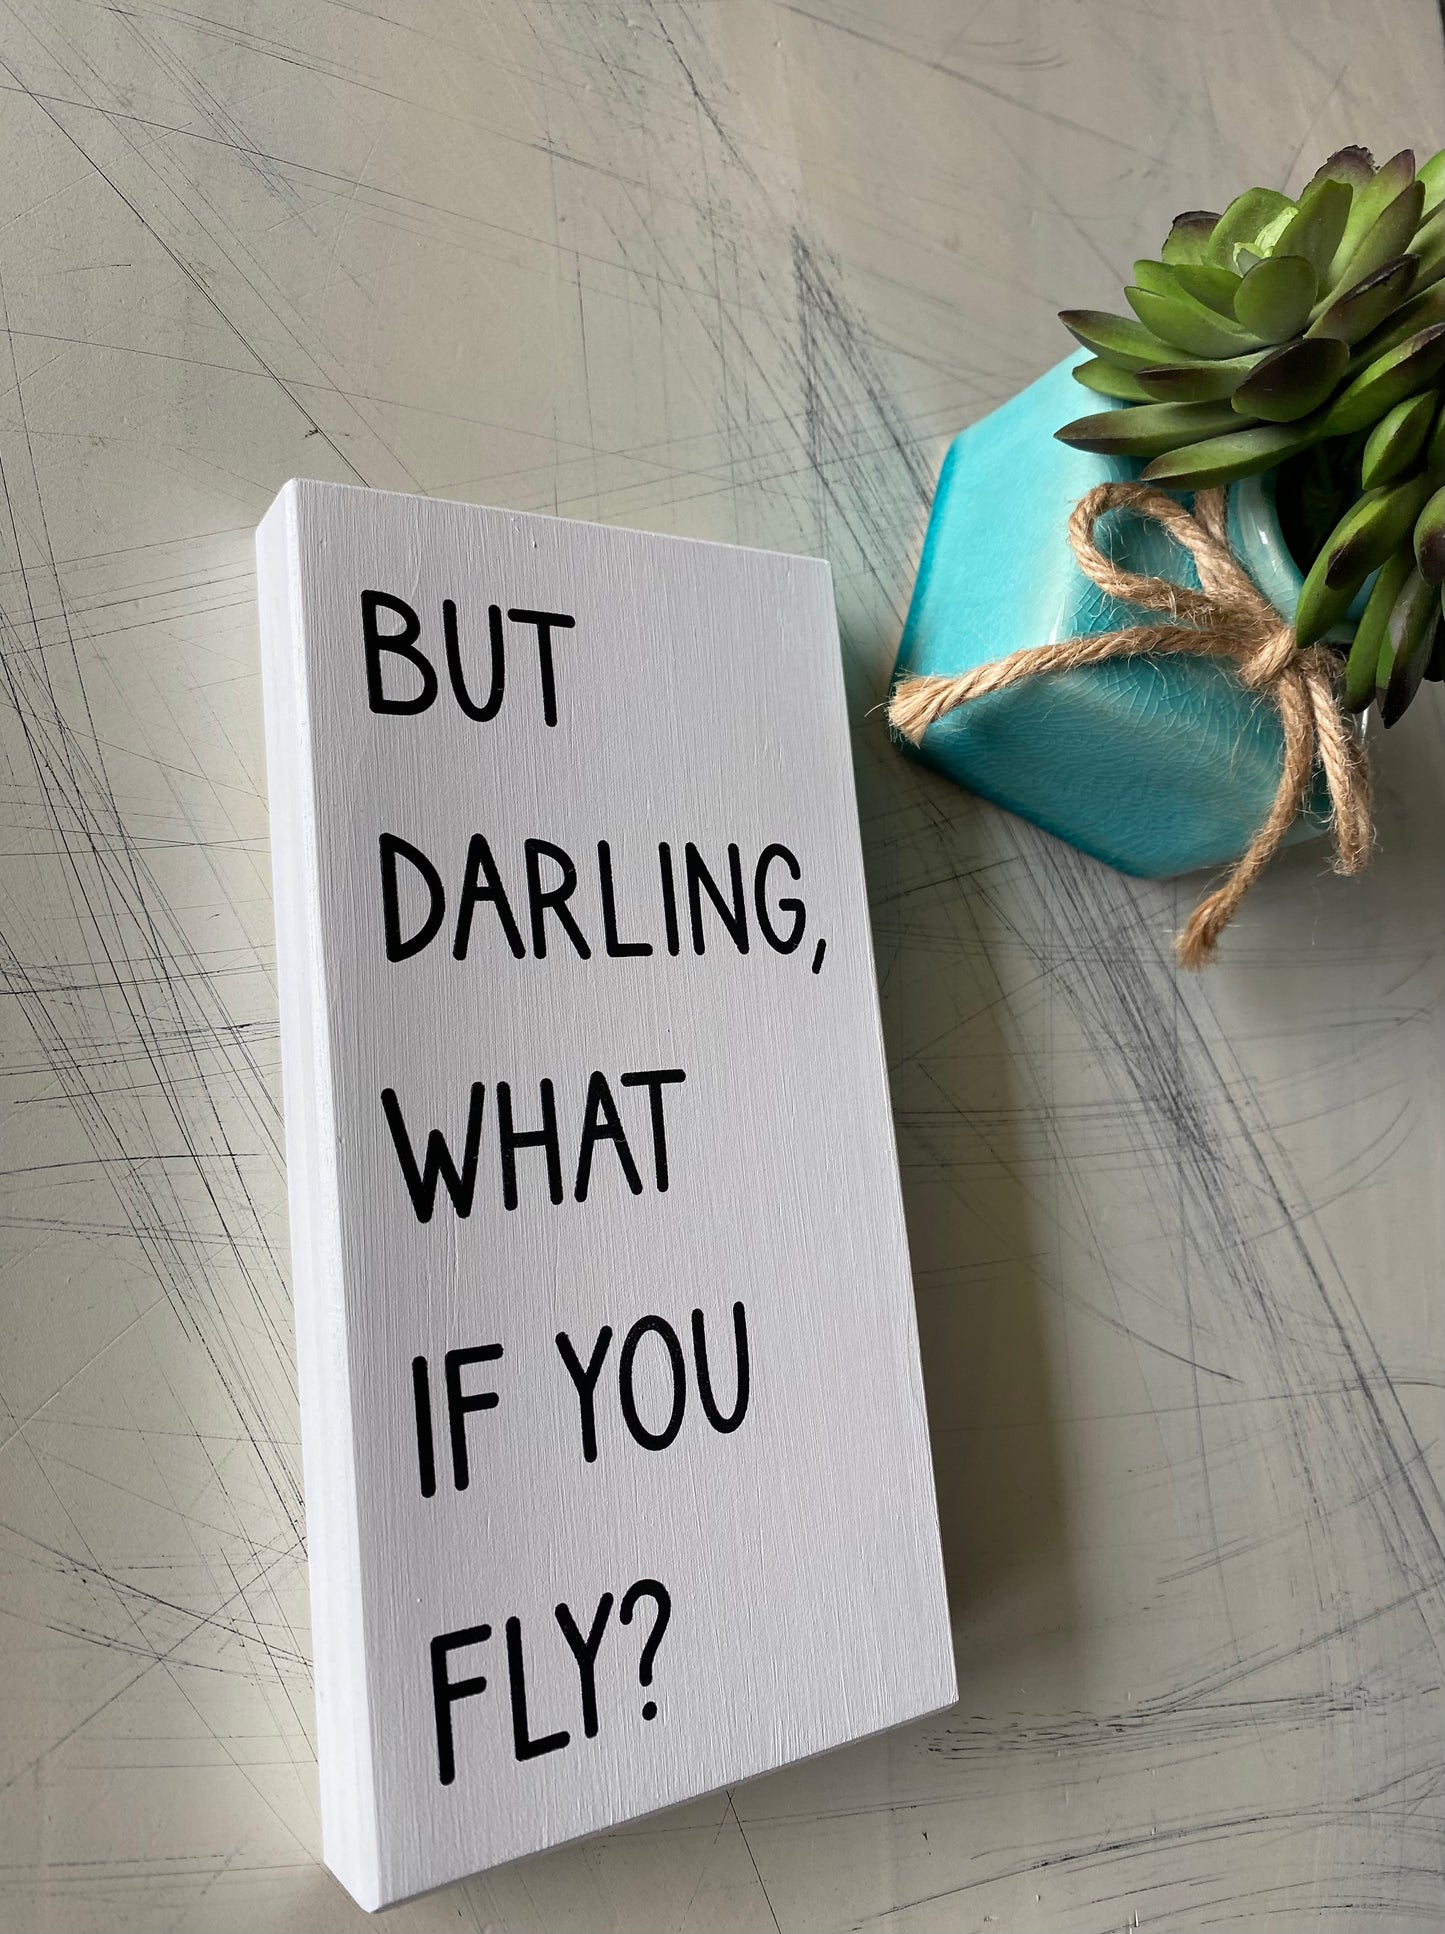 But darling what if you fly? Mini wood sign